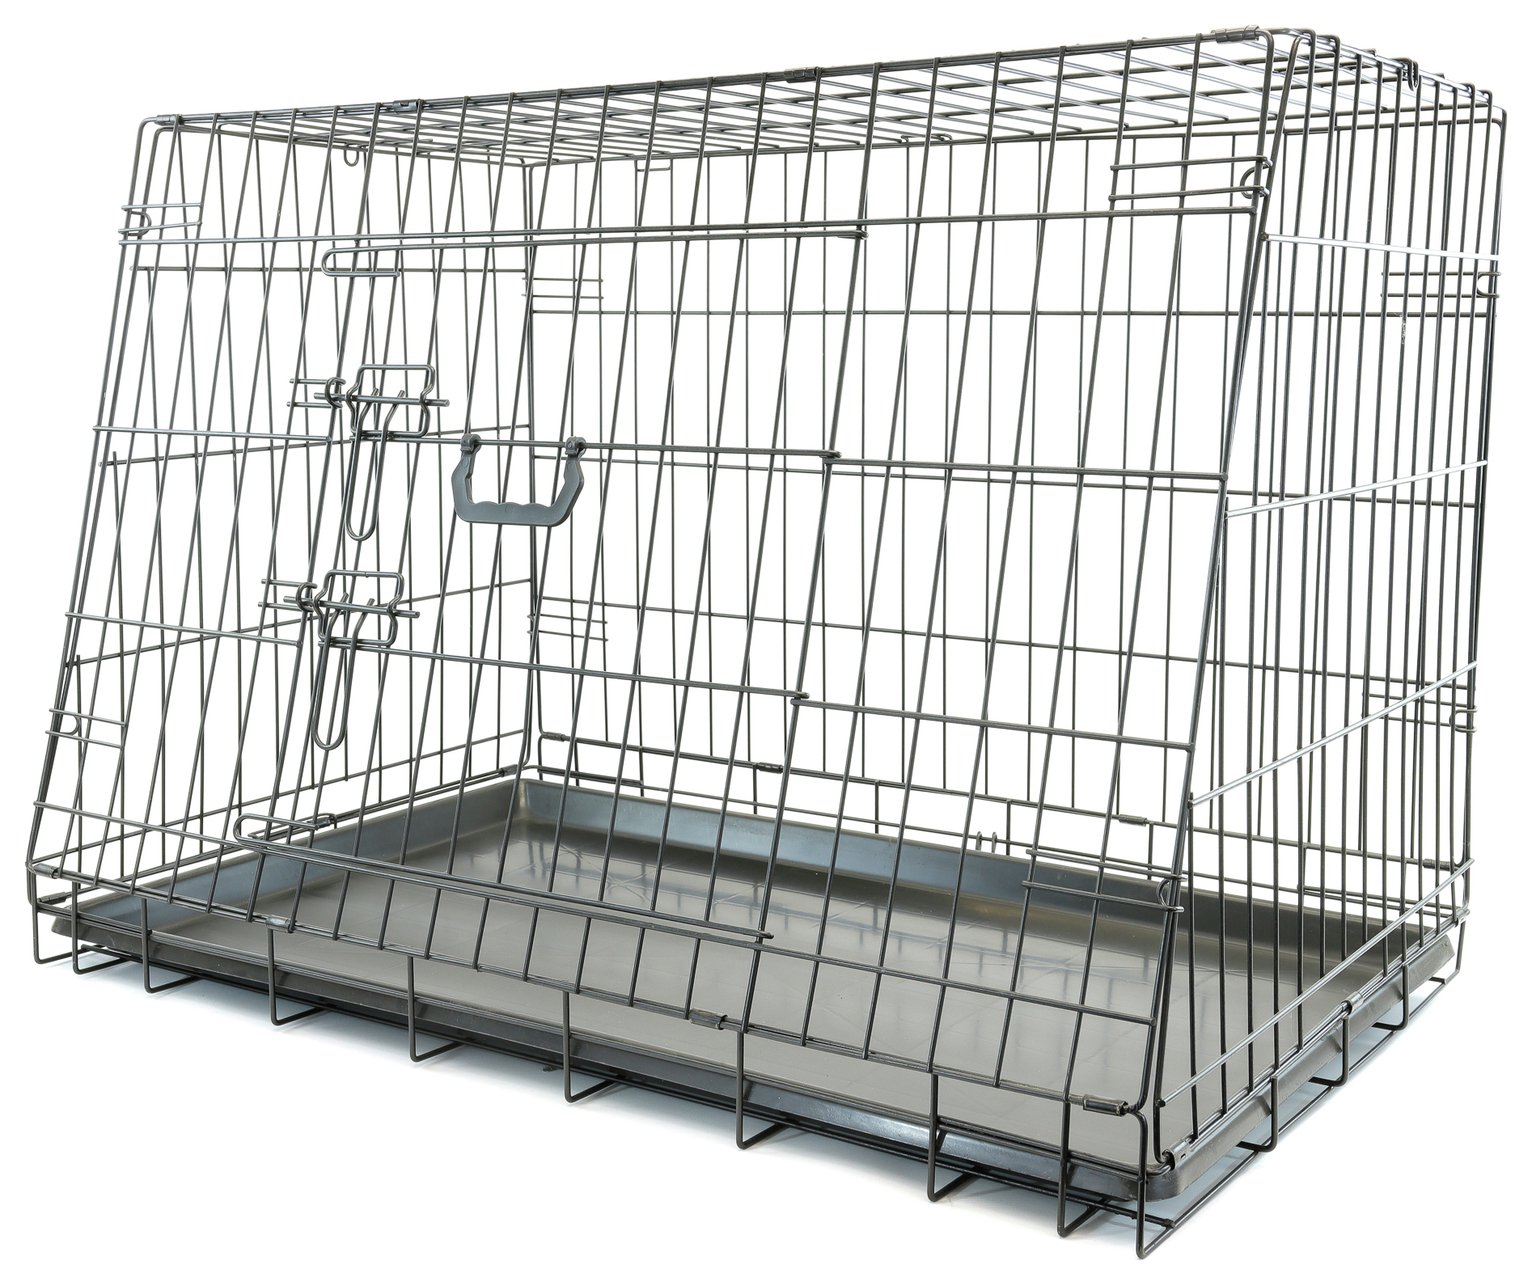 Streetwize Dog Crate For Car Boot - Medium